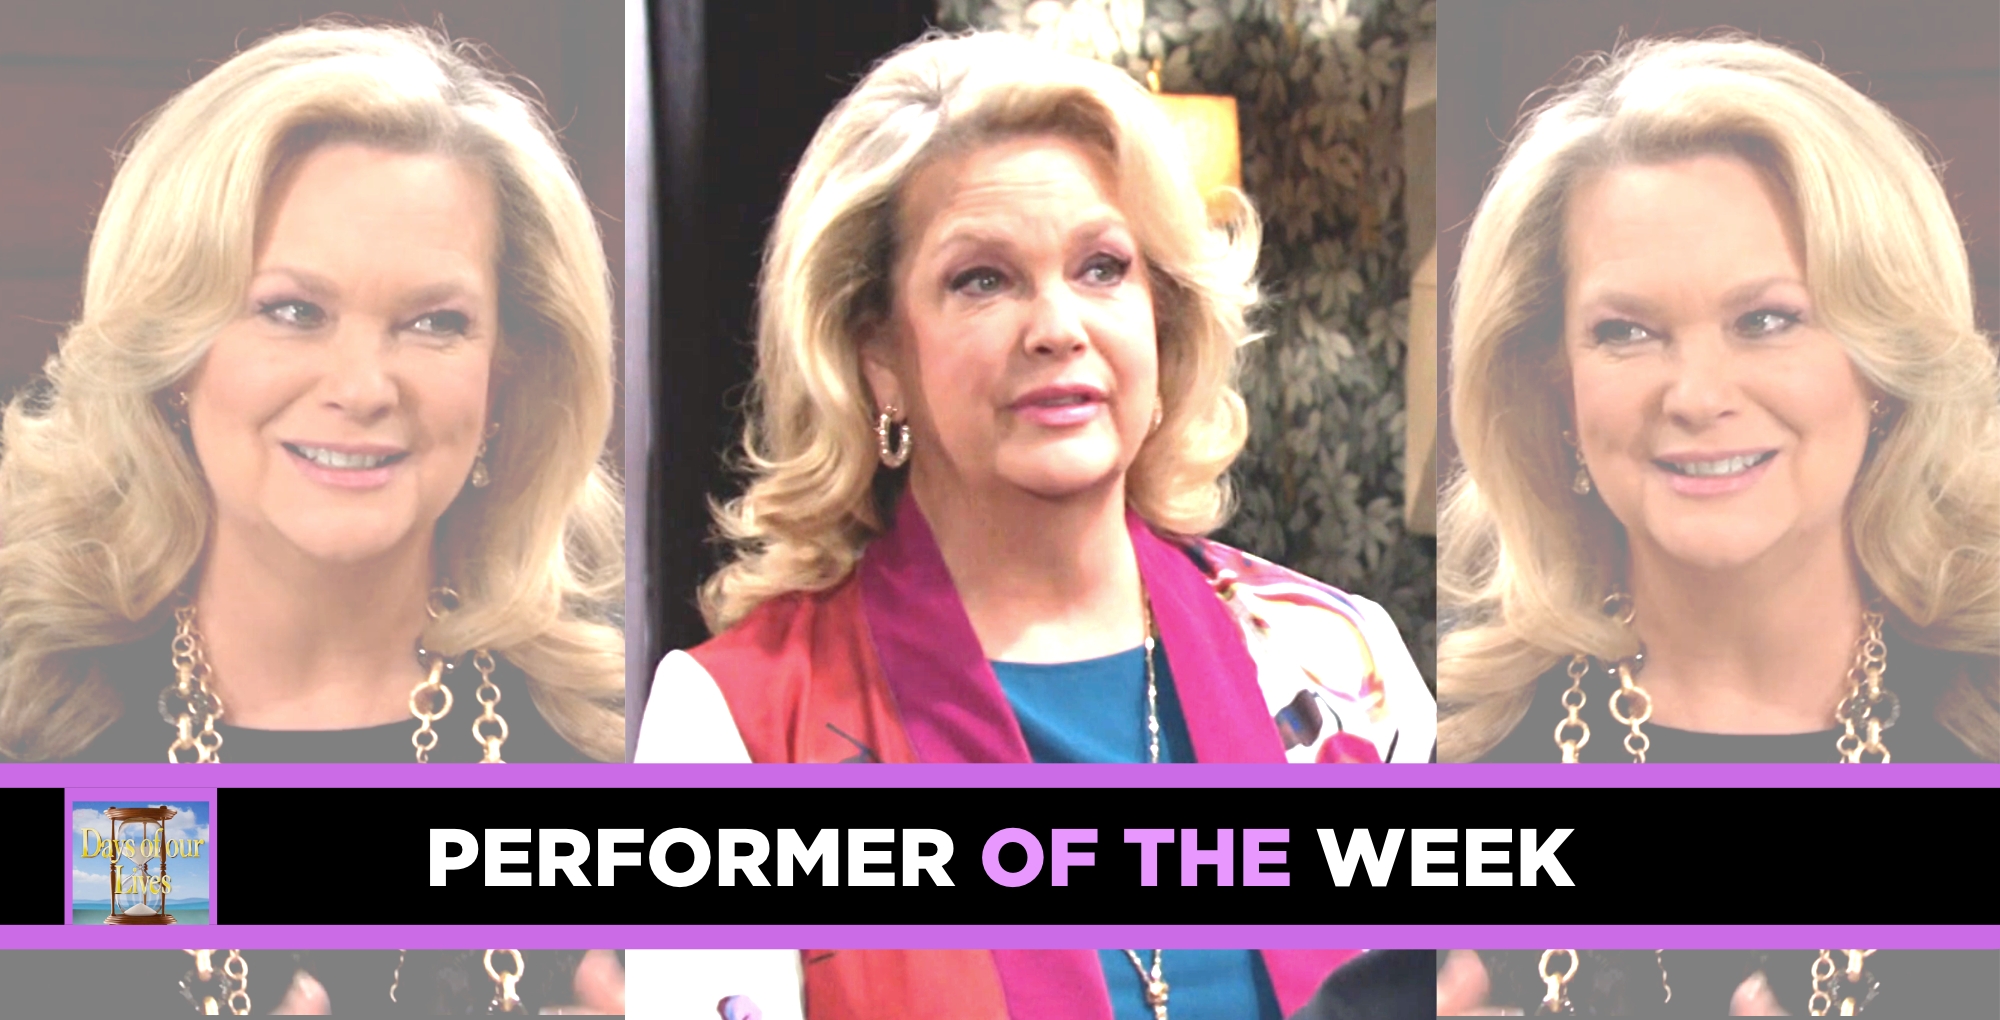 leann hunley performer of the week the days of our lives.